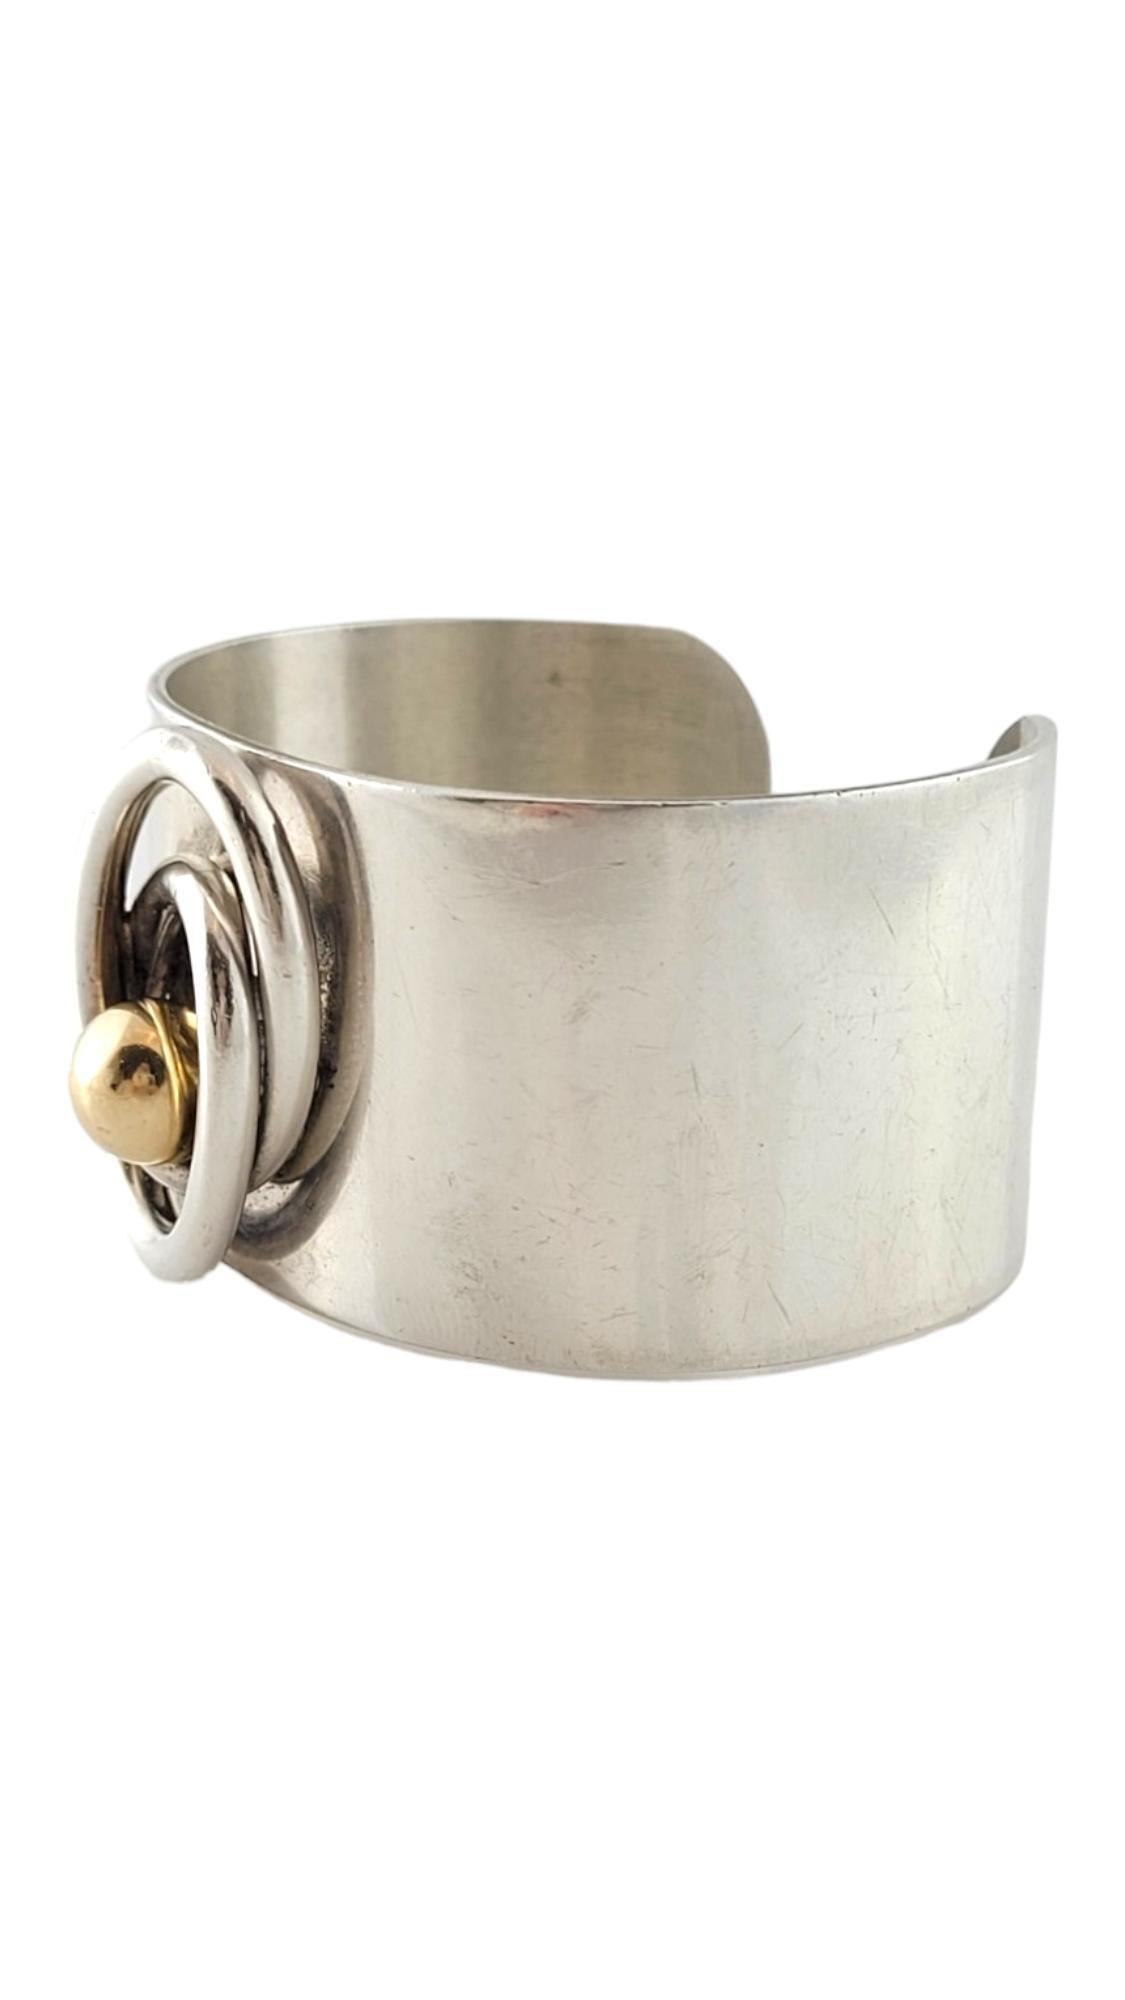 Vintage Pierre Cardin 14K Yellow Gold & Sterling Silver Modernist Cuff Bracelet

This gorgeous modernist cuff bracelet by Pierre Cardin is crafted from sterling silver with beautiful 14K yellow gold detailing!

Size: 5 3/4